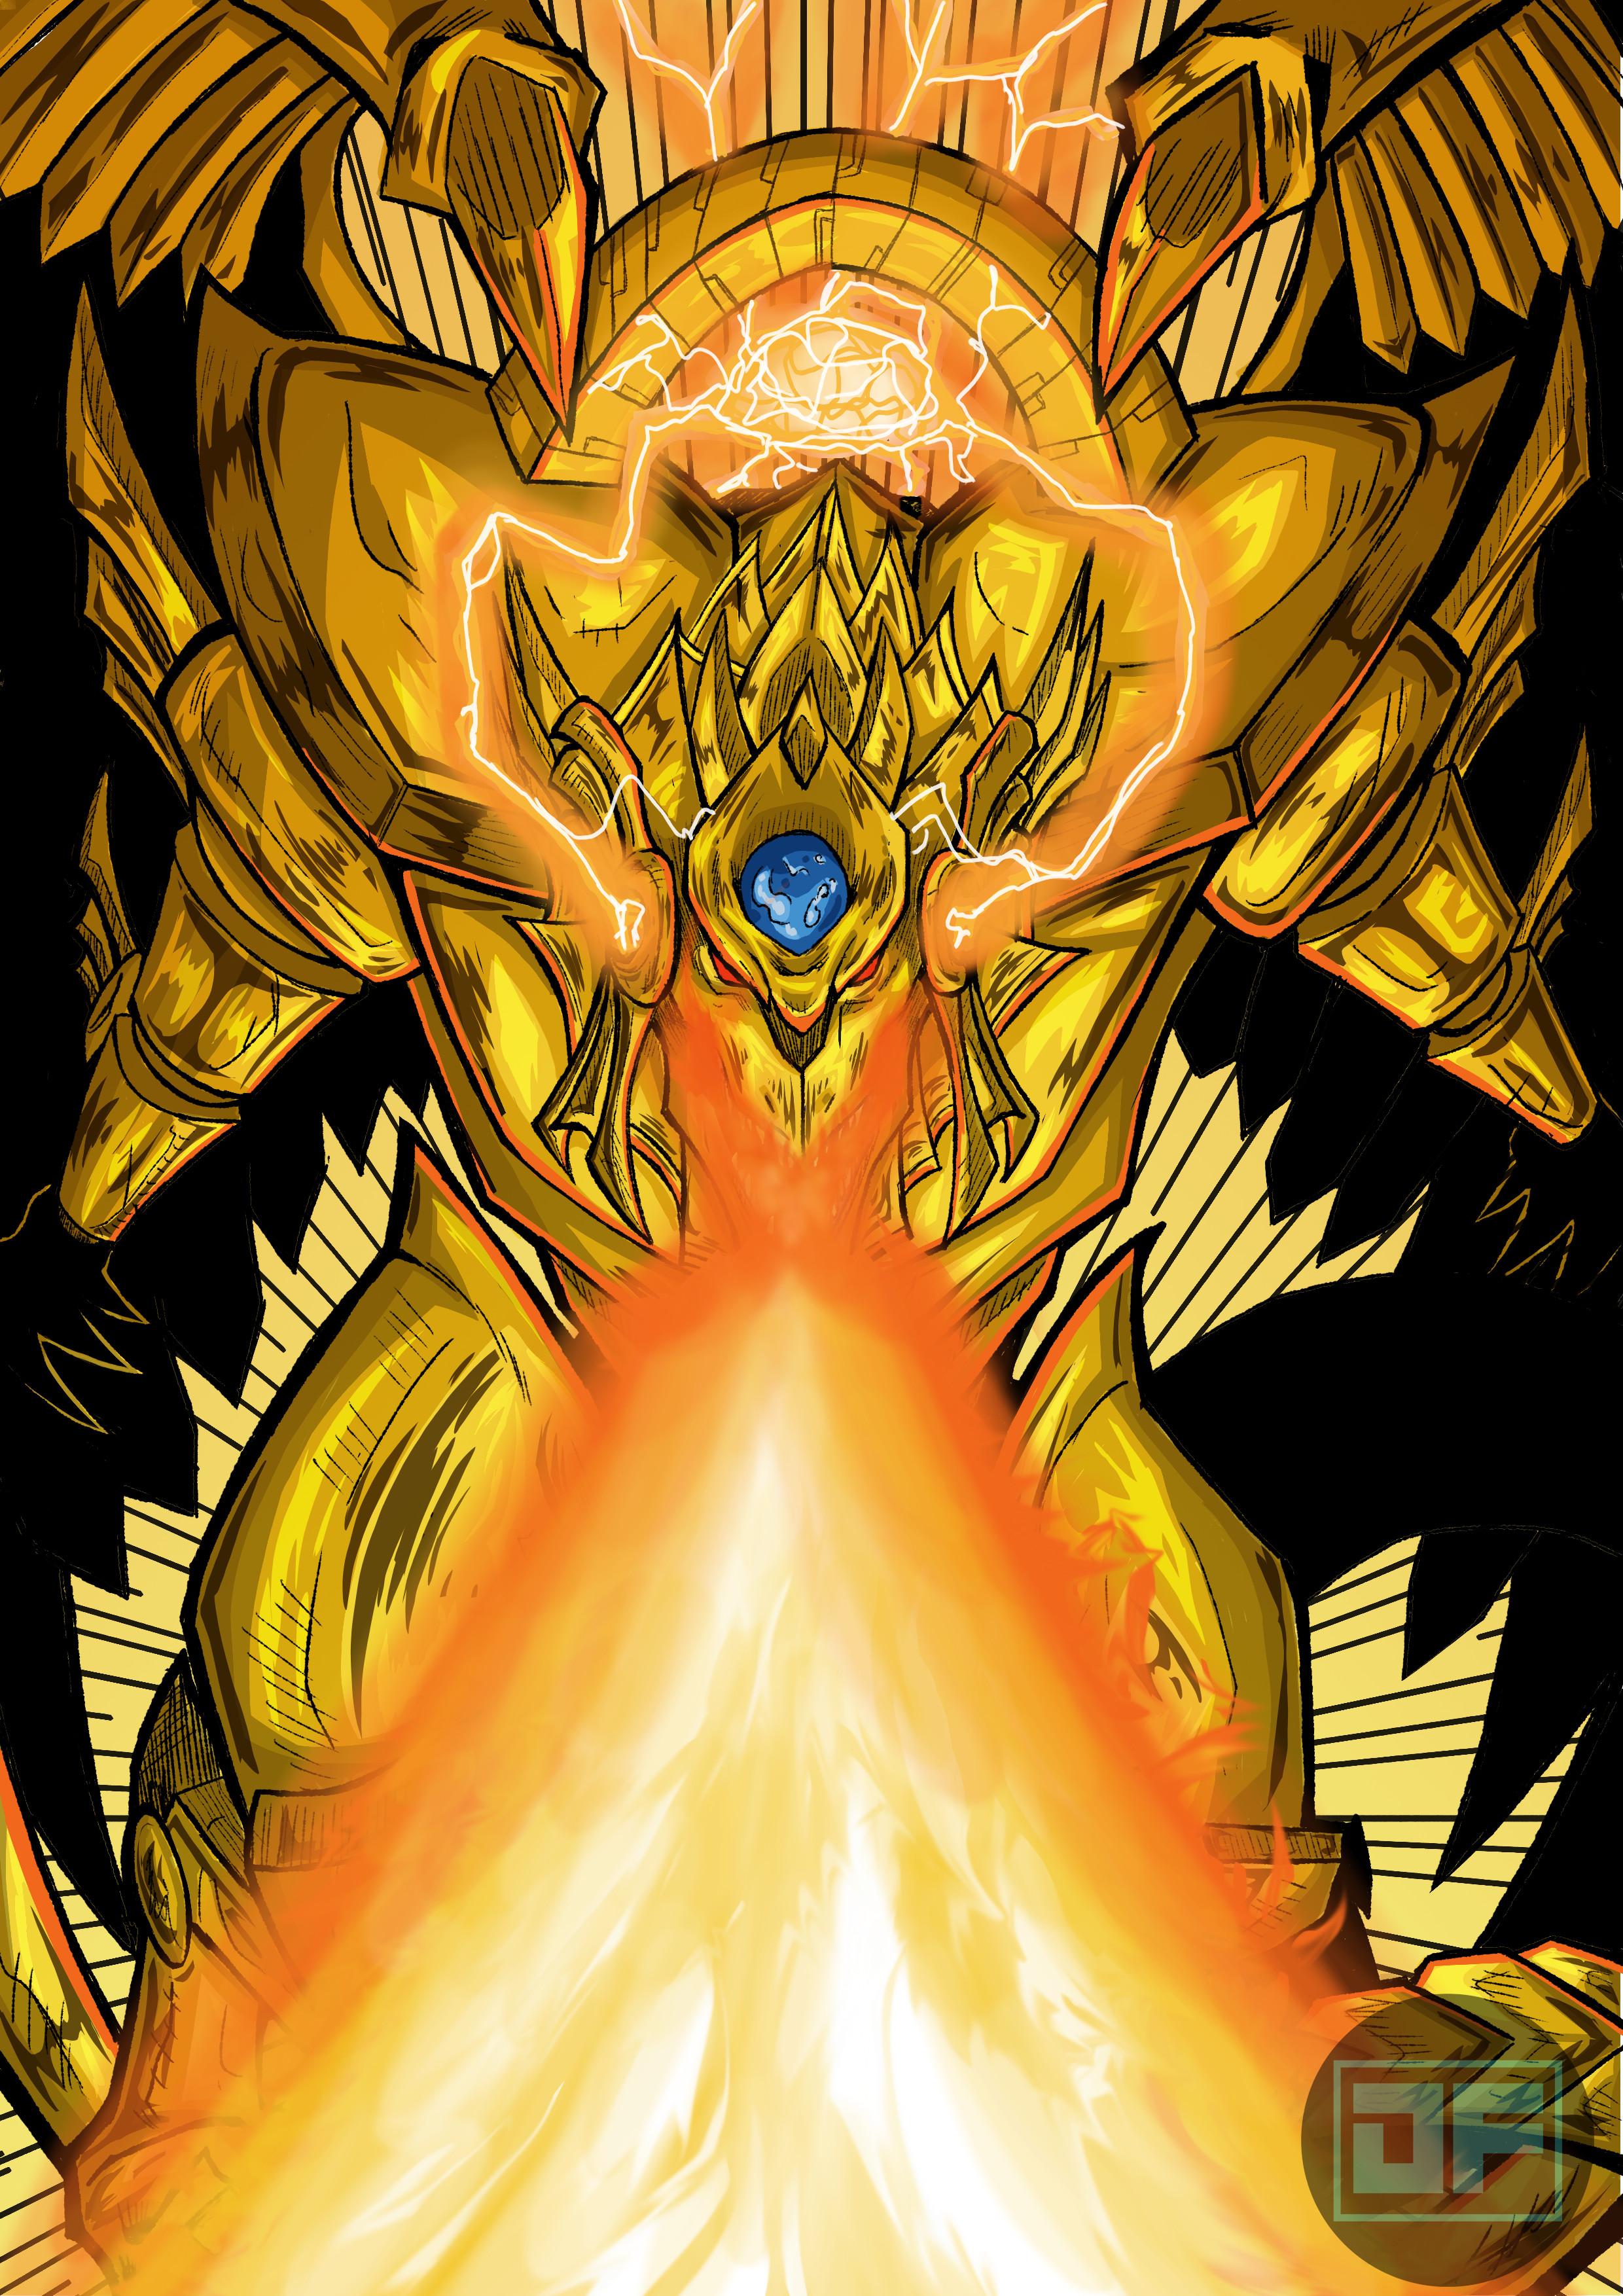 Hey guys last but not least The Winged Dragon Of Ra! thanks for